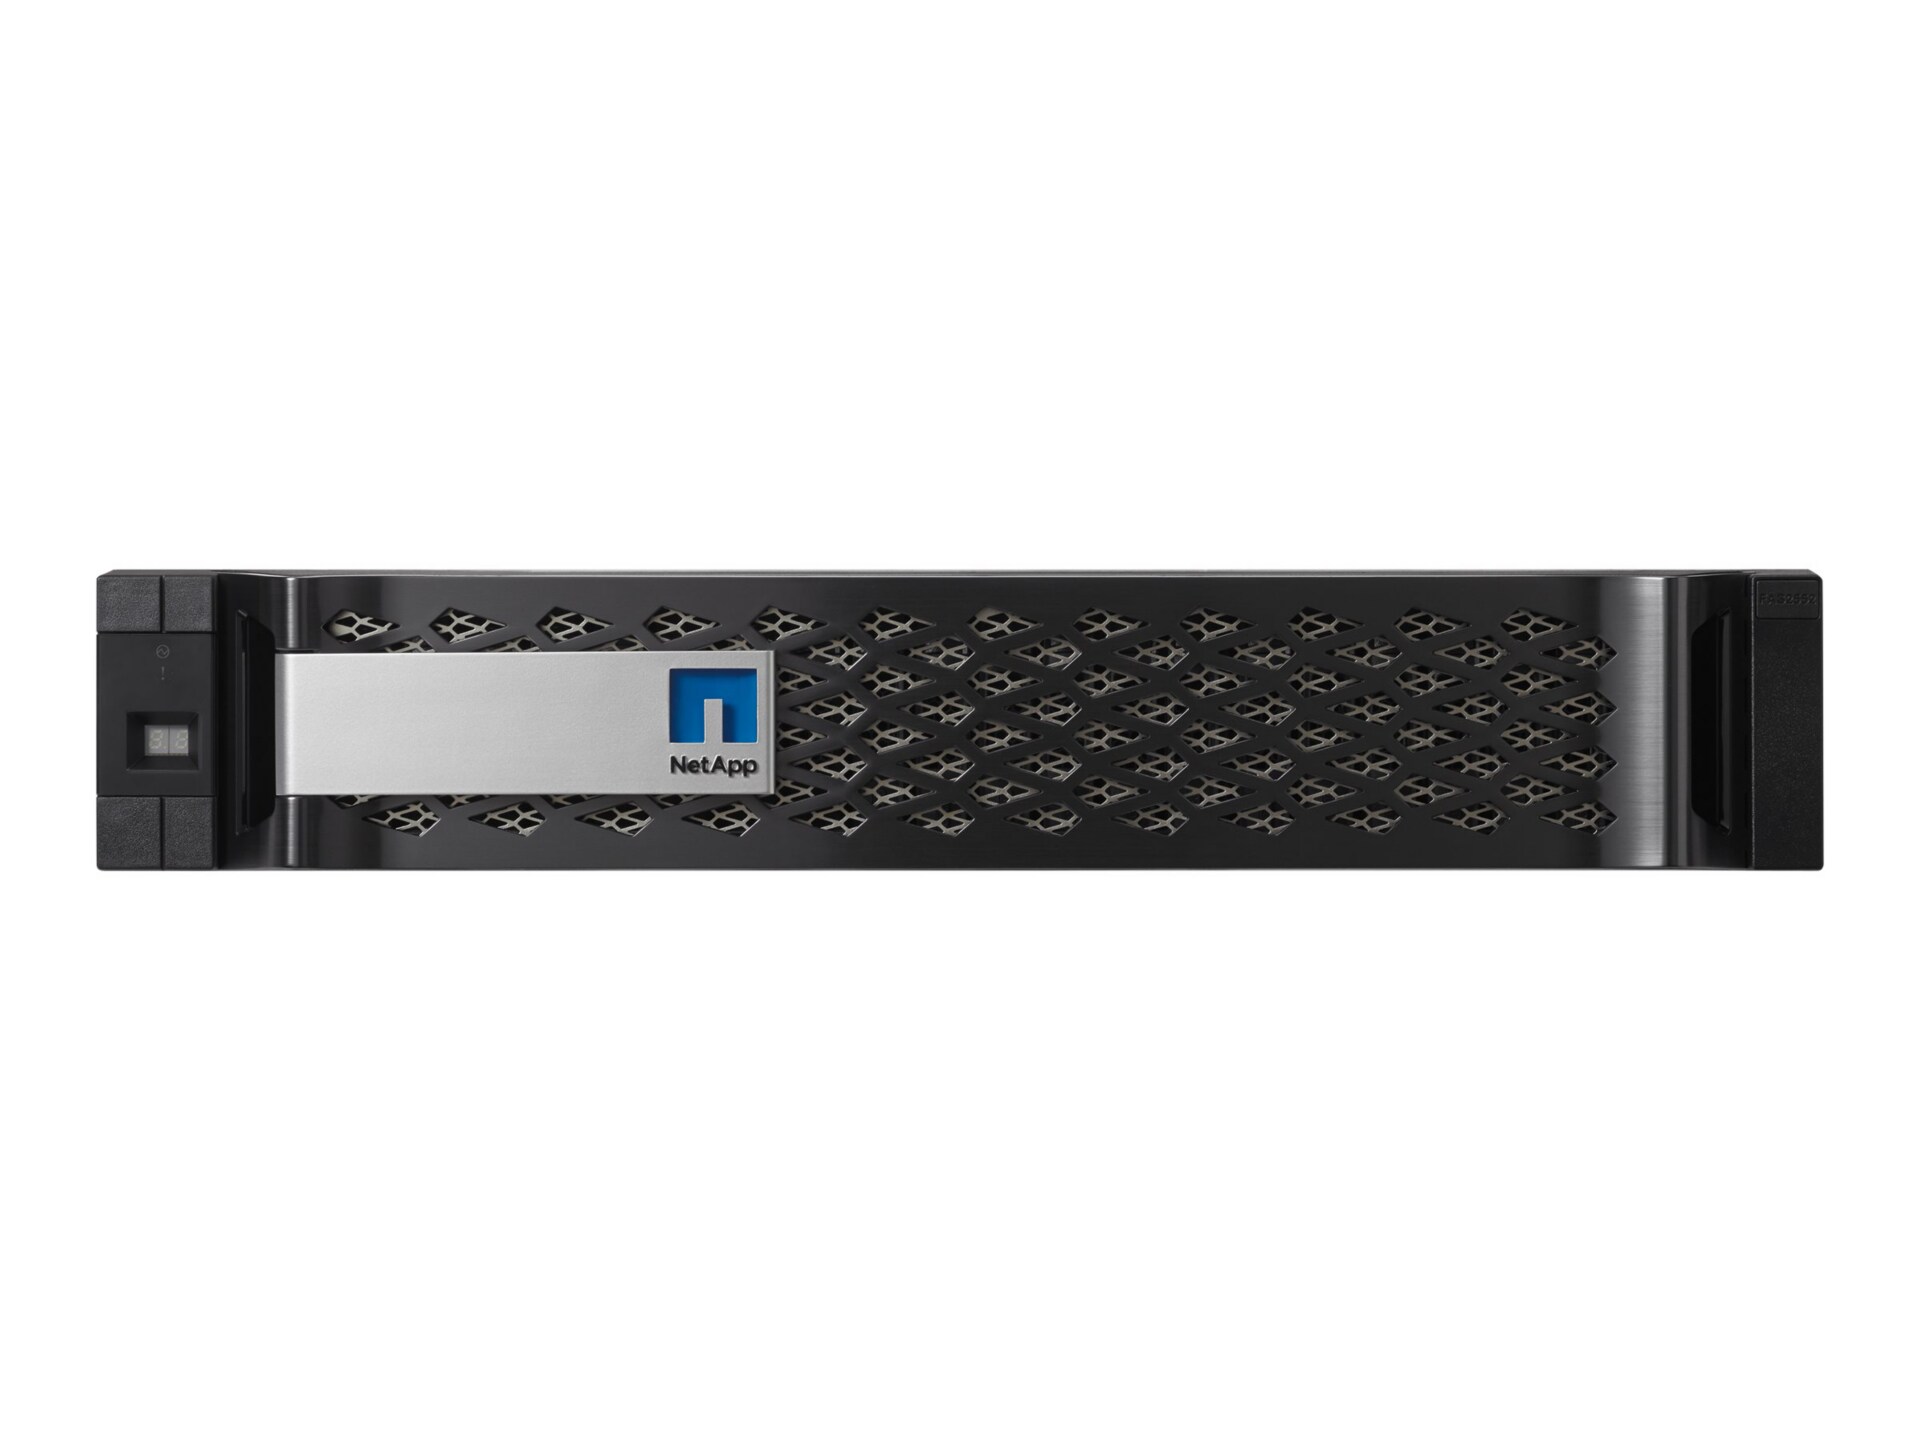 Netapp 7.2TB FAS2552 Dual-Ctrlr System with 10Gb Ethernet optics and cables